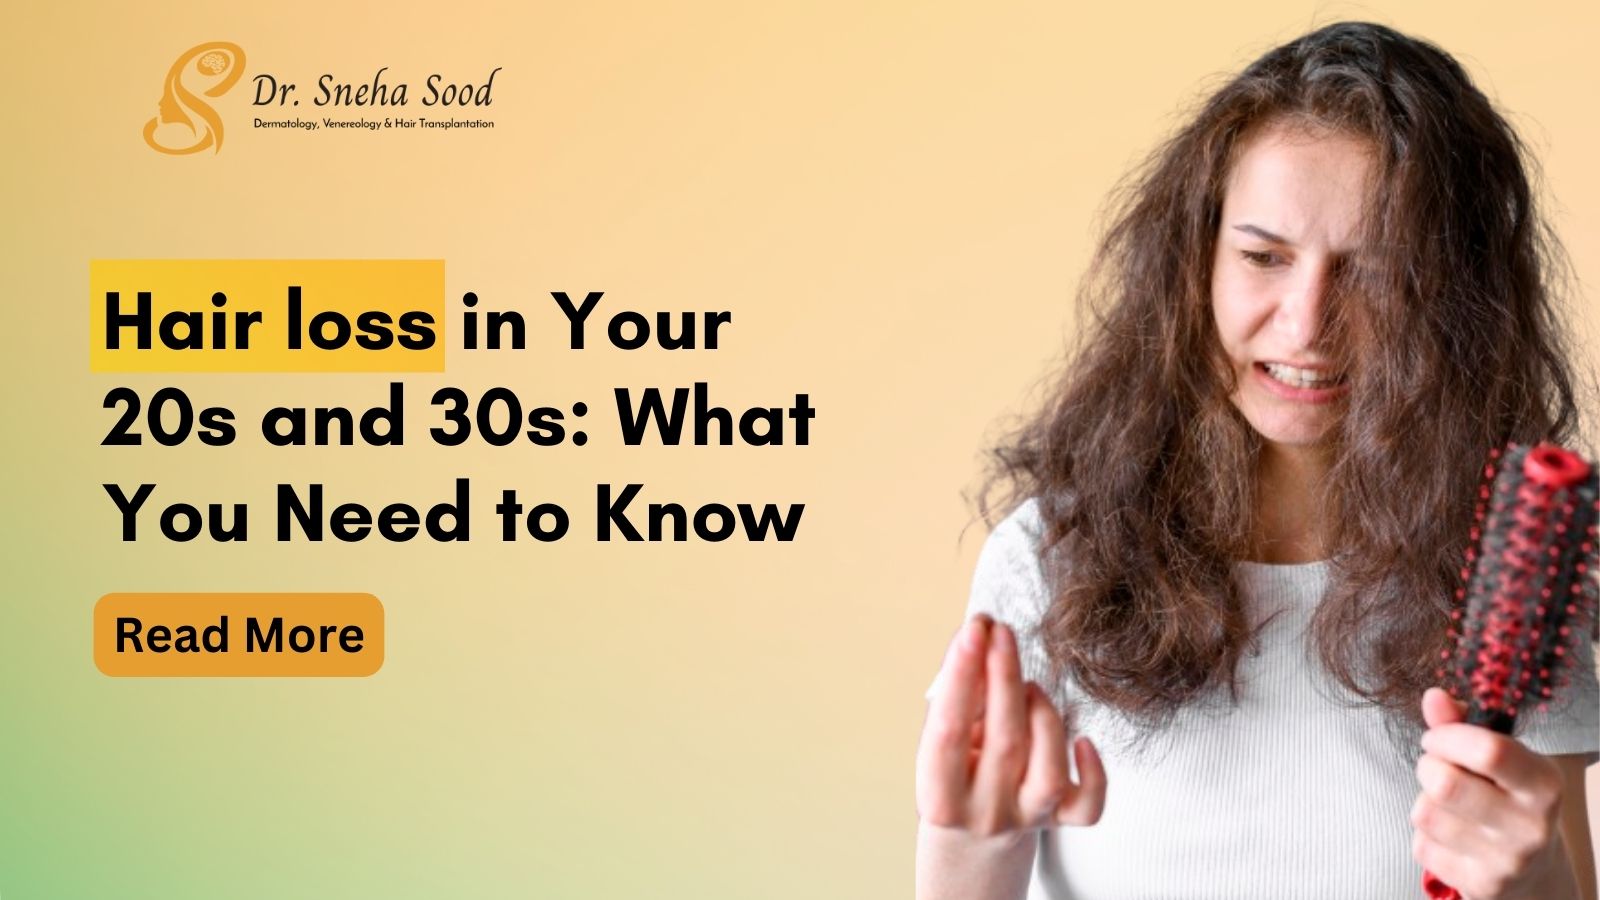 Hair Loss in 20s and 30s: What You Need to Know